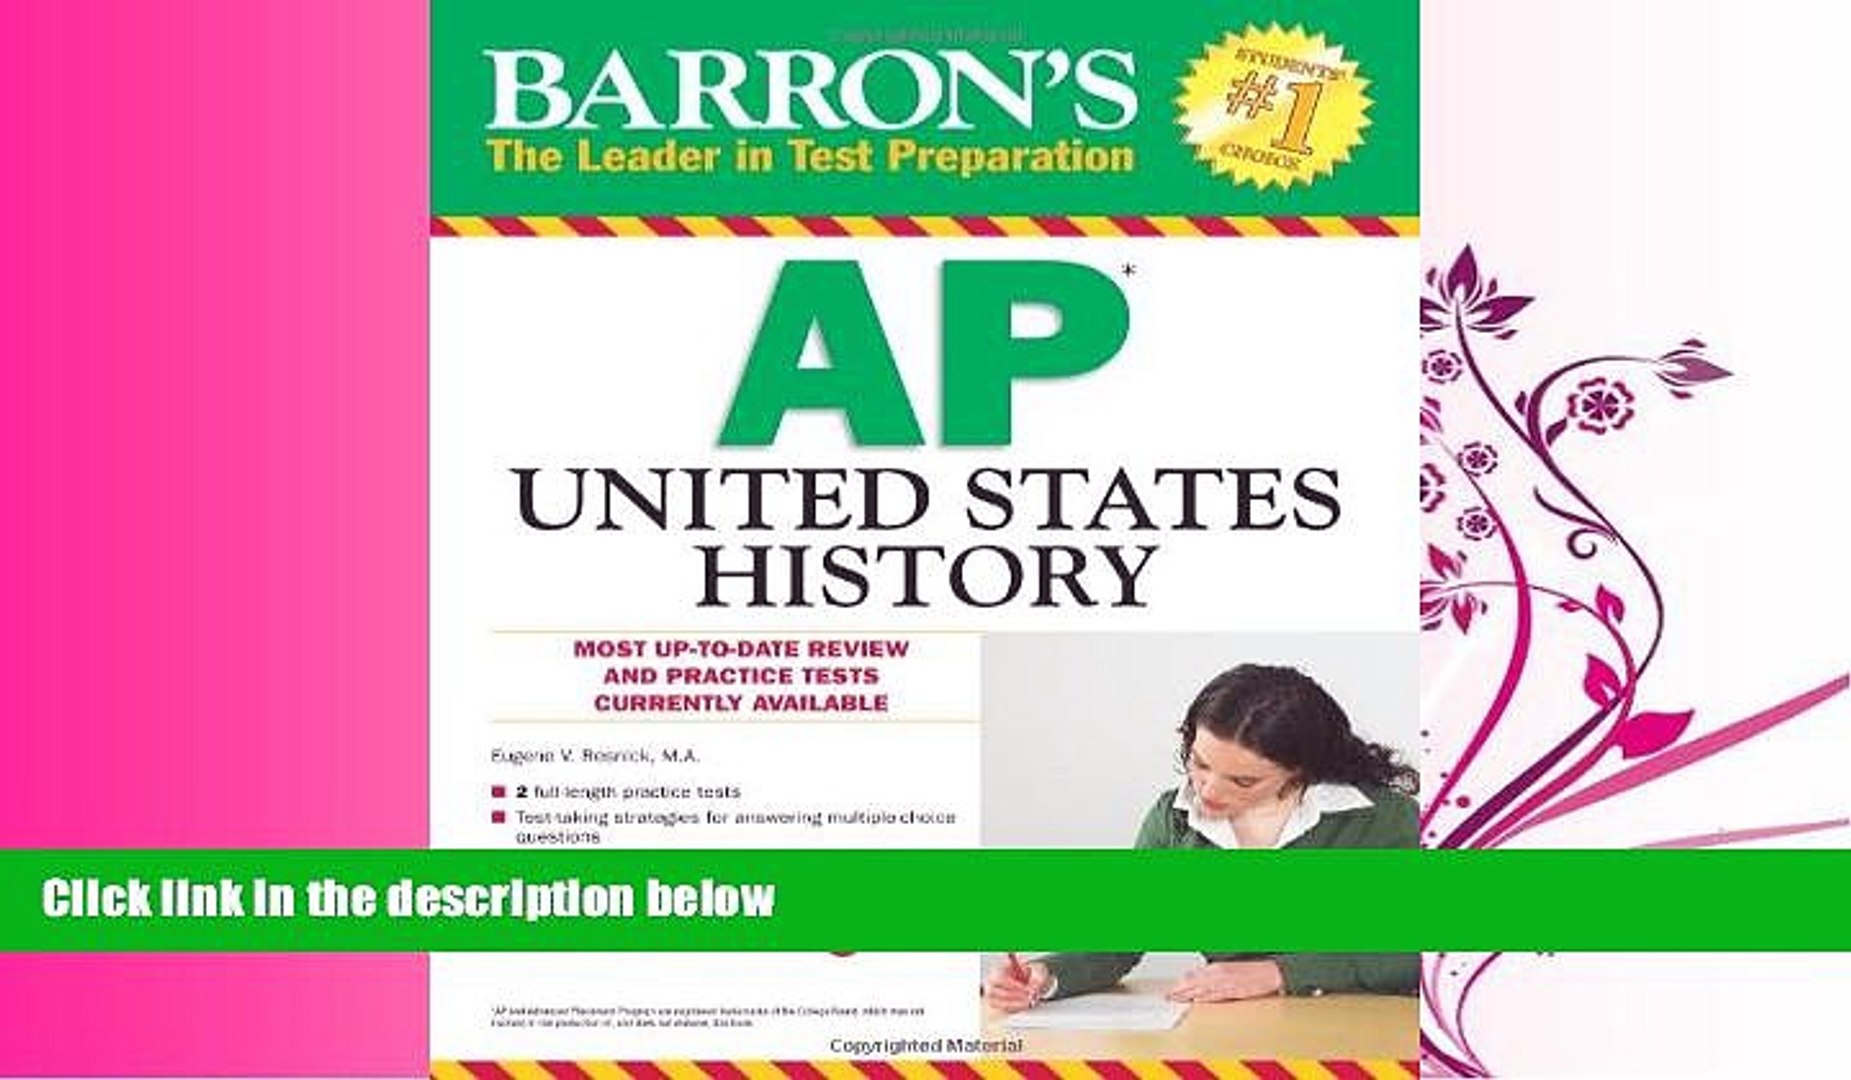 Different Barron's AP United States History courses can give you a unique perspective on American hi